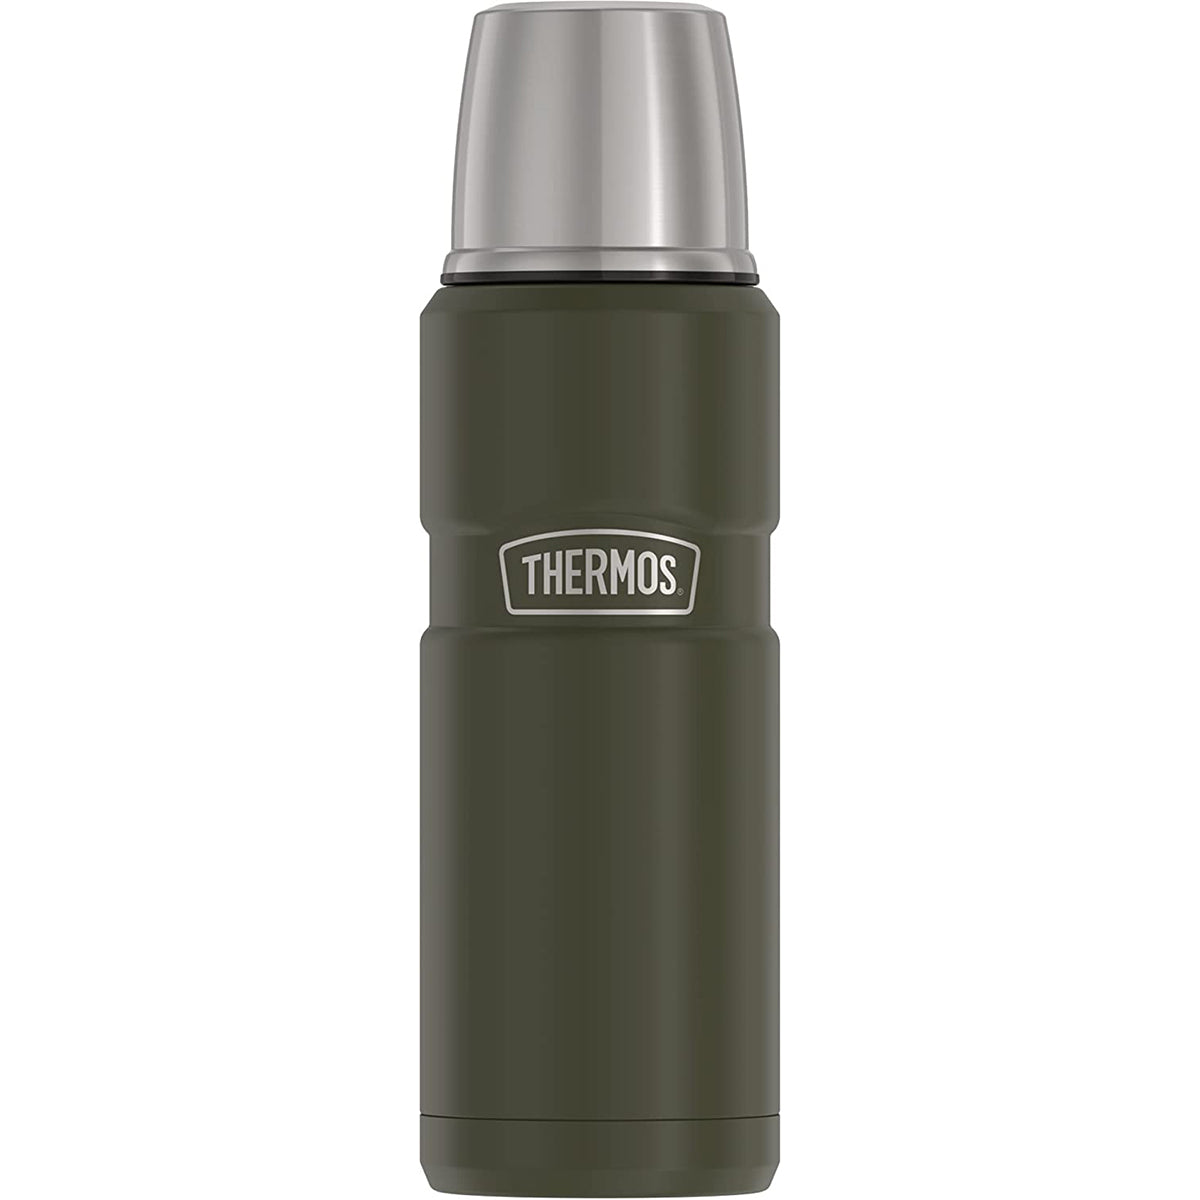 Thermos 16 oz. Stainless King Vacuum Insulated Stainless Steel Beverage Bottle Thermos